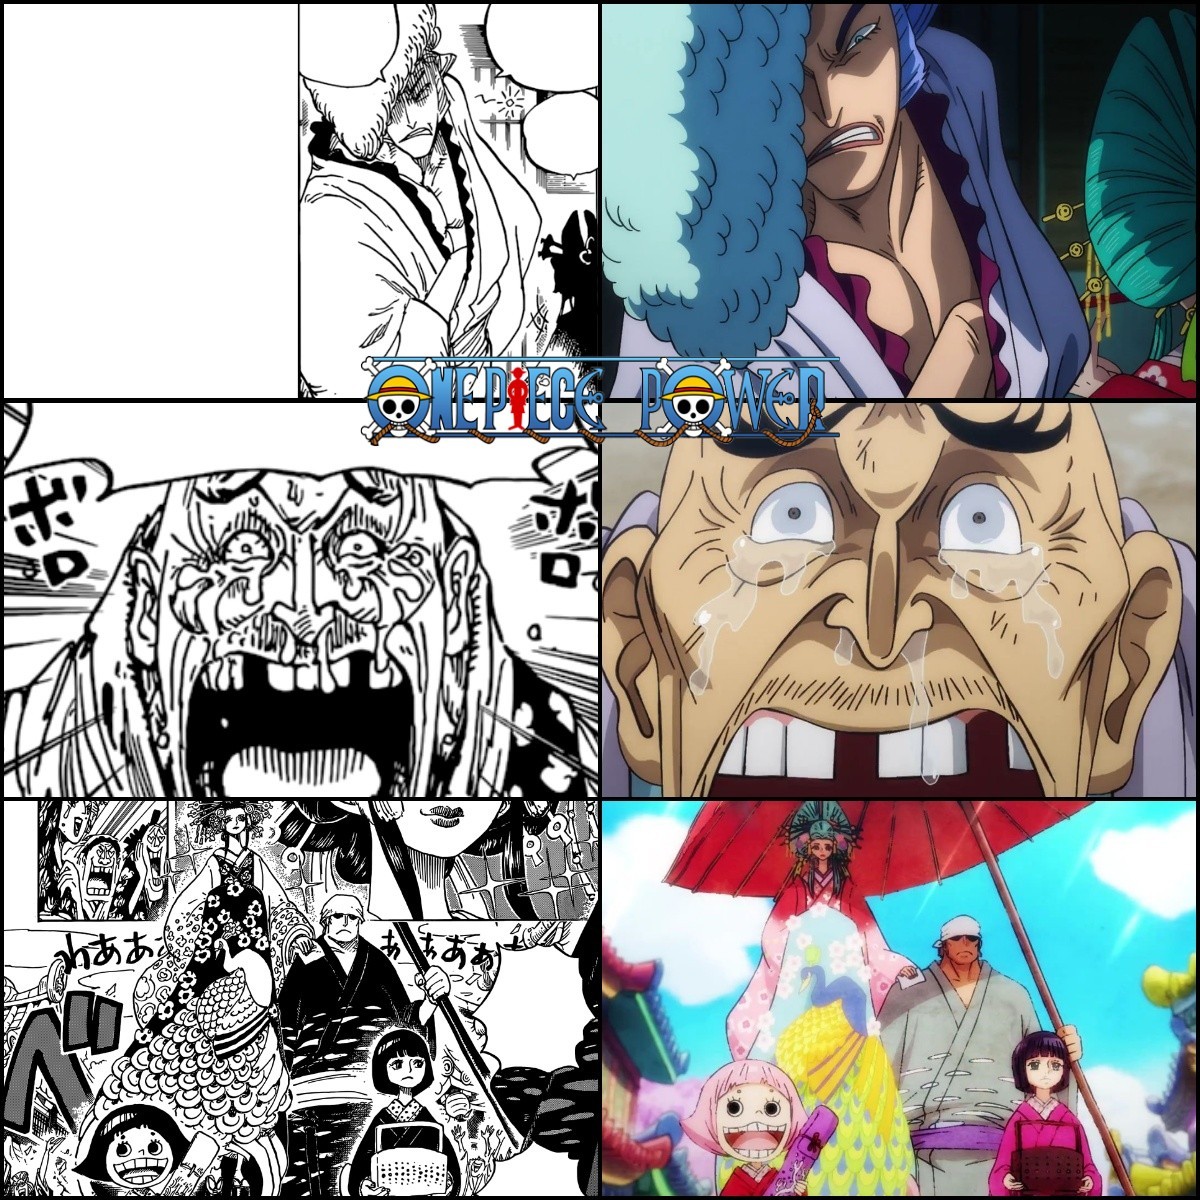 Episode 921 Vs Chapters 927-928